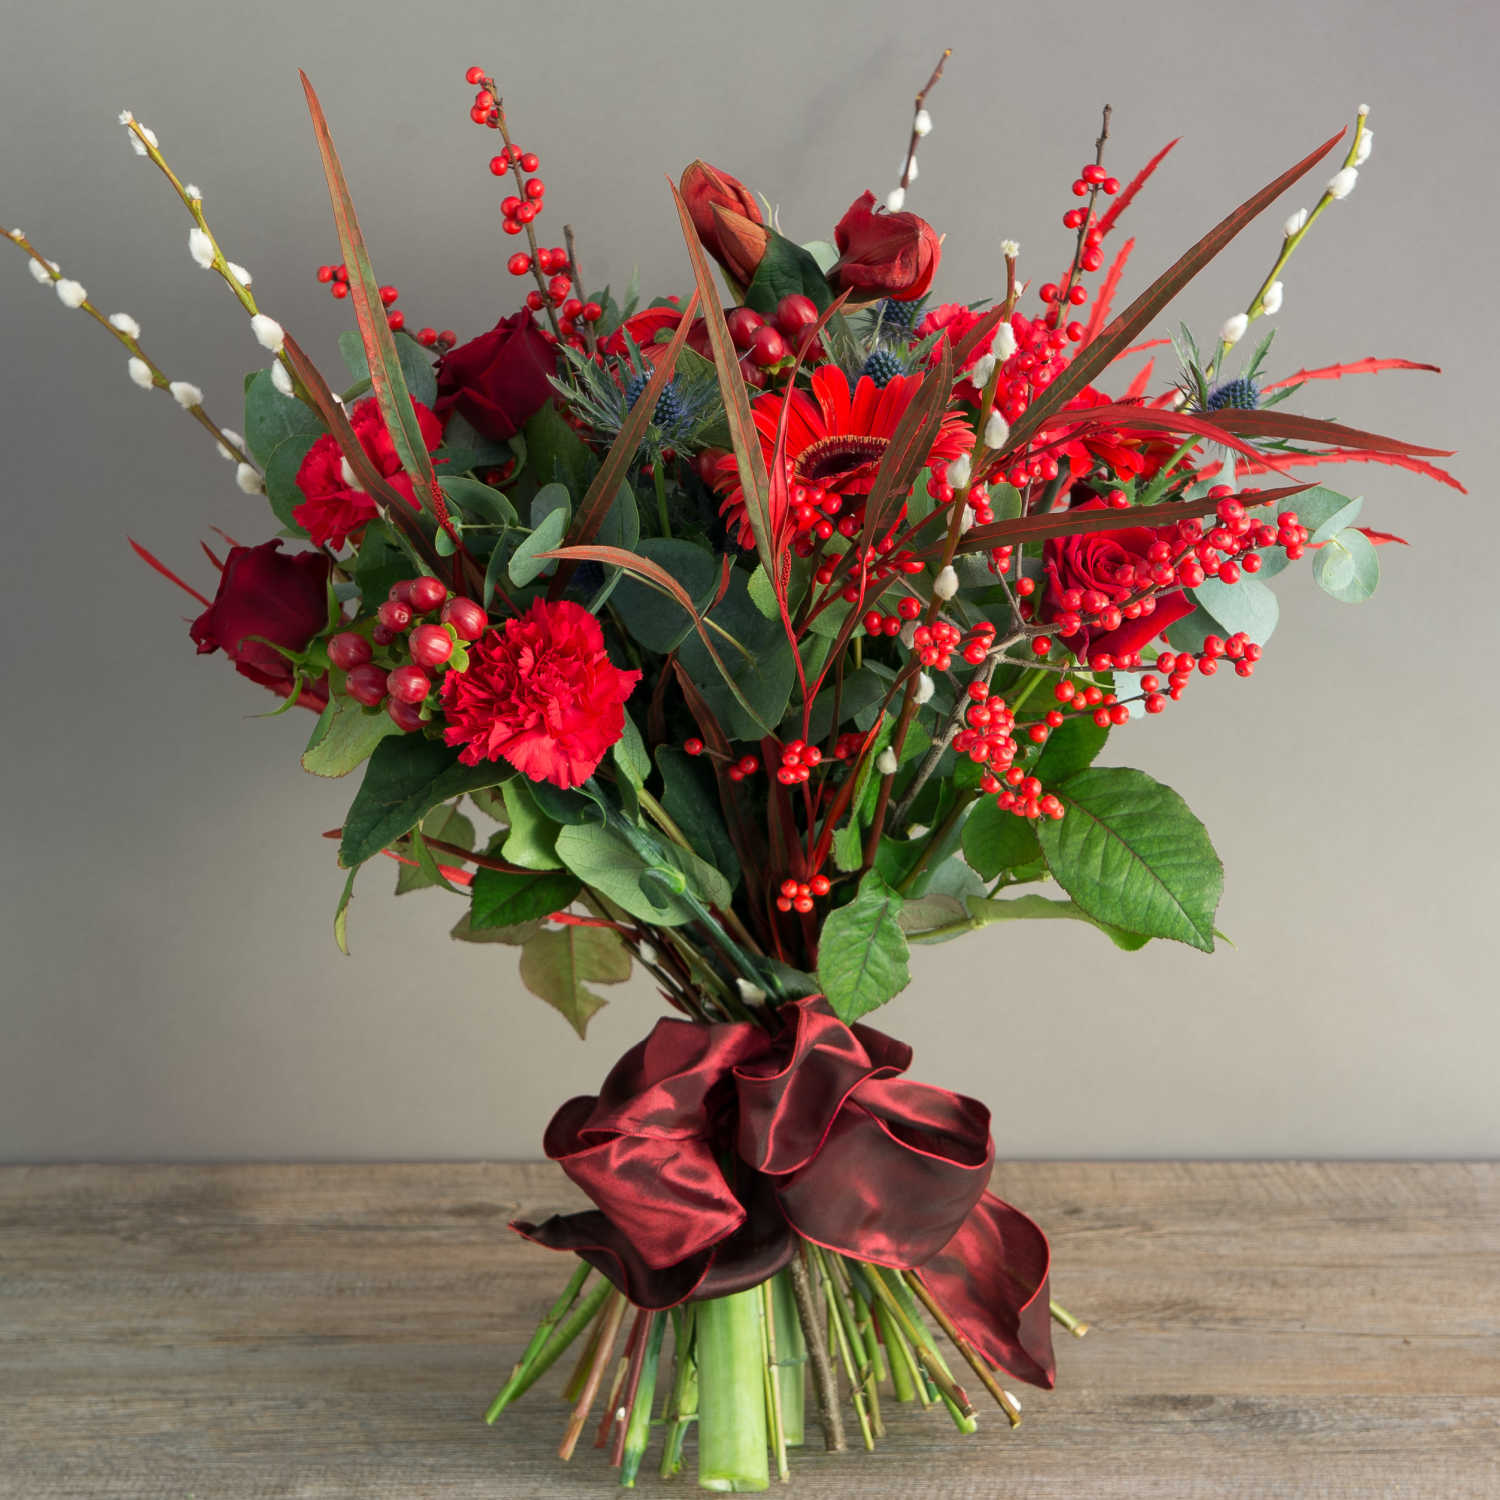 Christmas Flower Symbolisms: What Do They Mean?